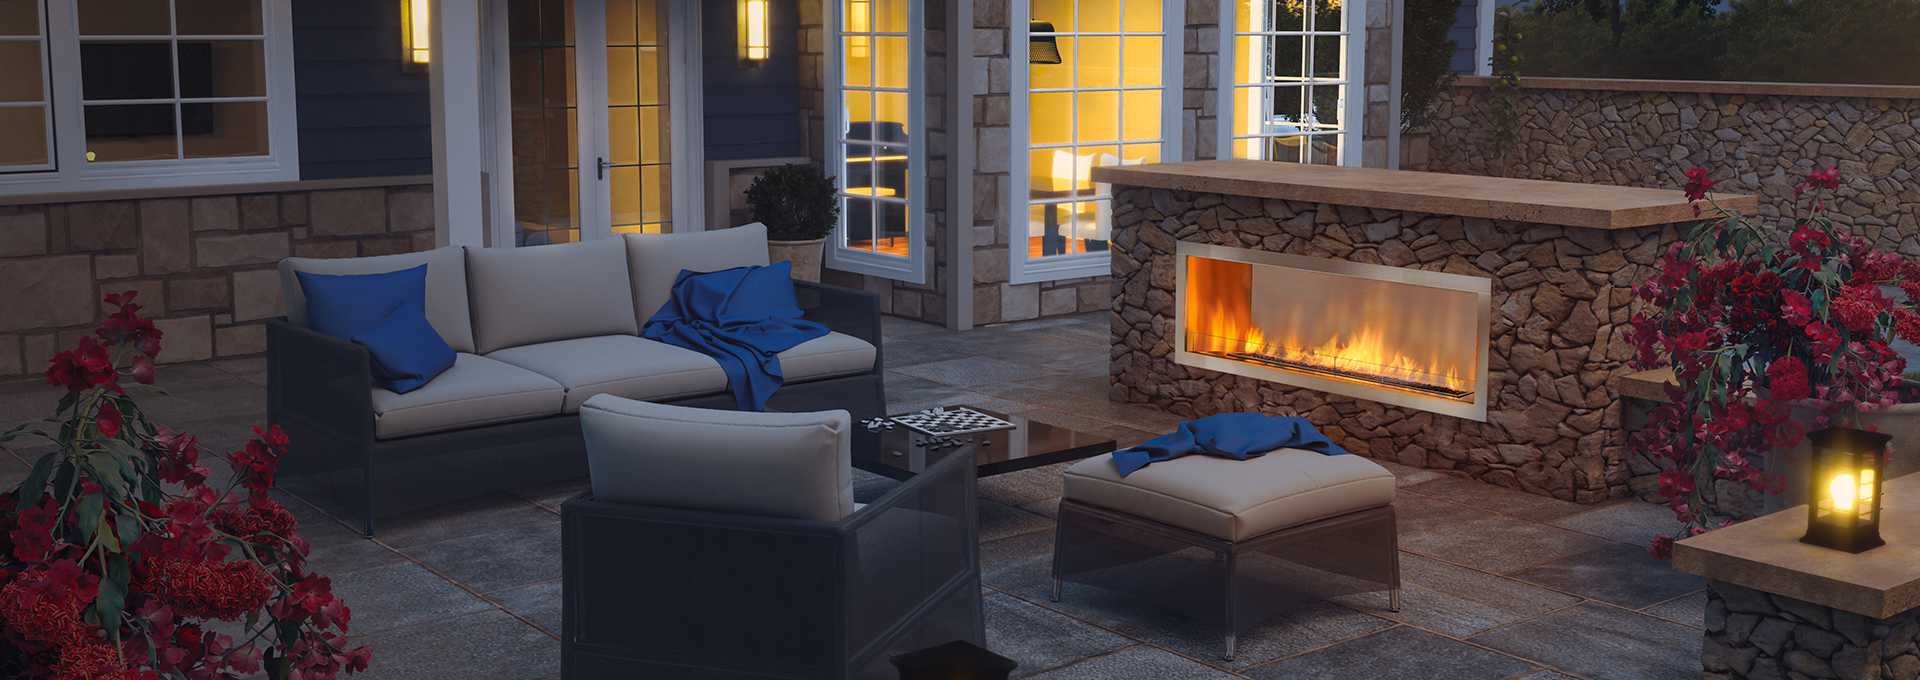 5 Features Of High Quality Outdoor Fireplaces Regency Fireplace Products